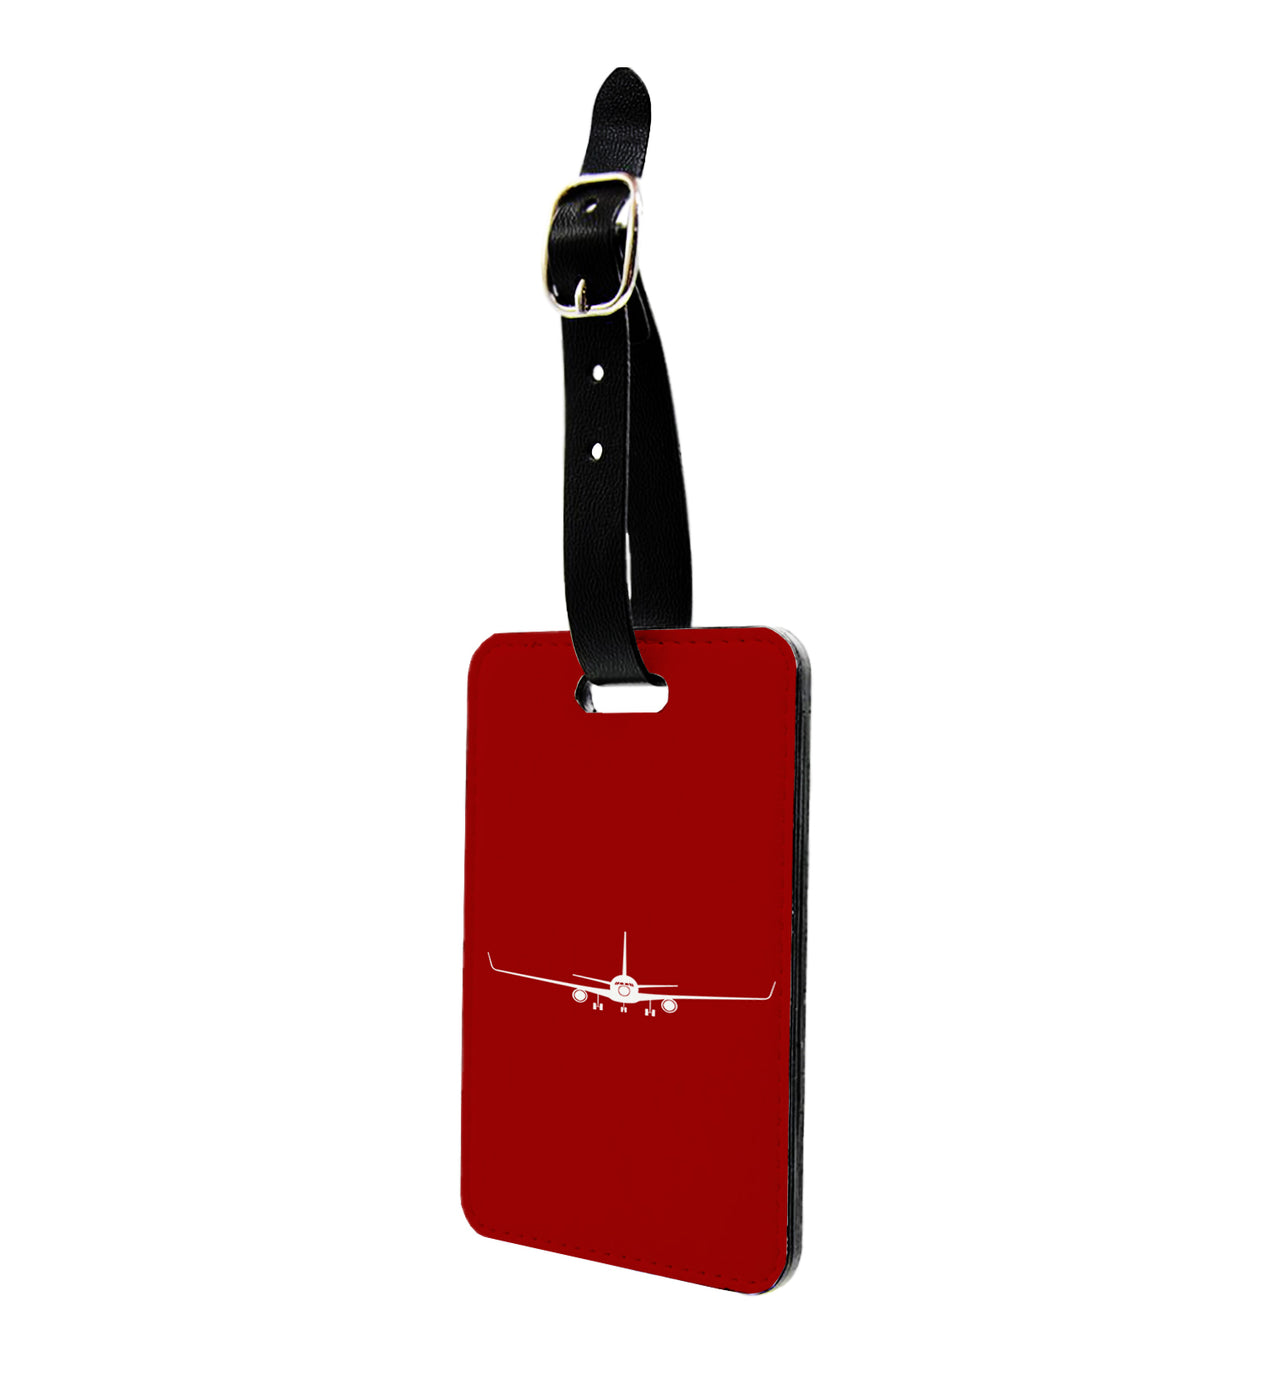 Boeing 767 Silhouette Designed Luggage Tag